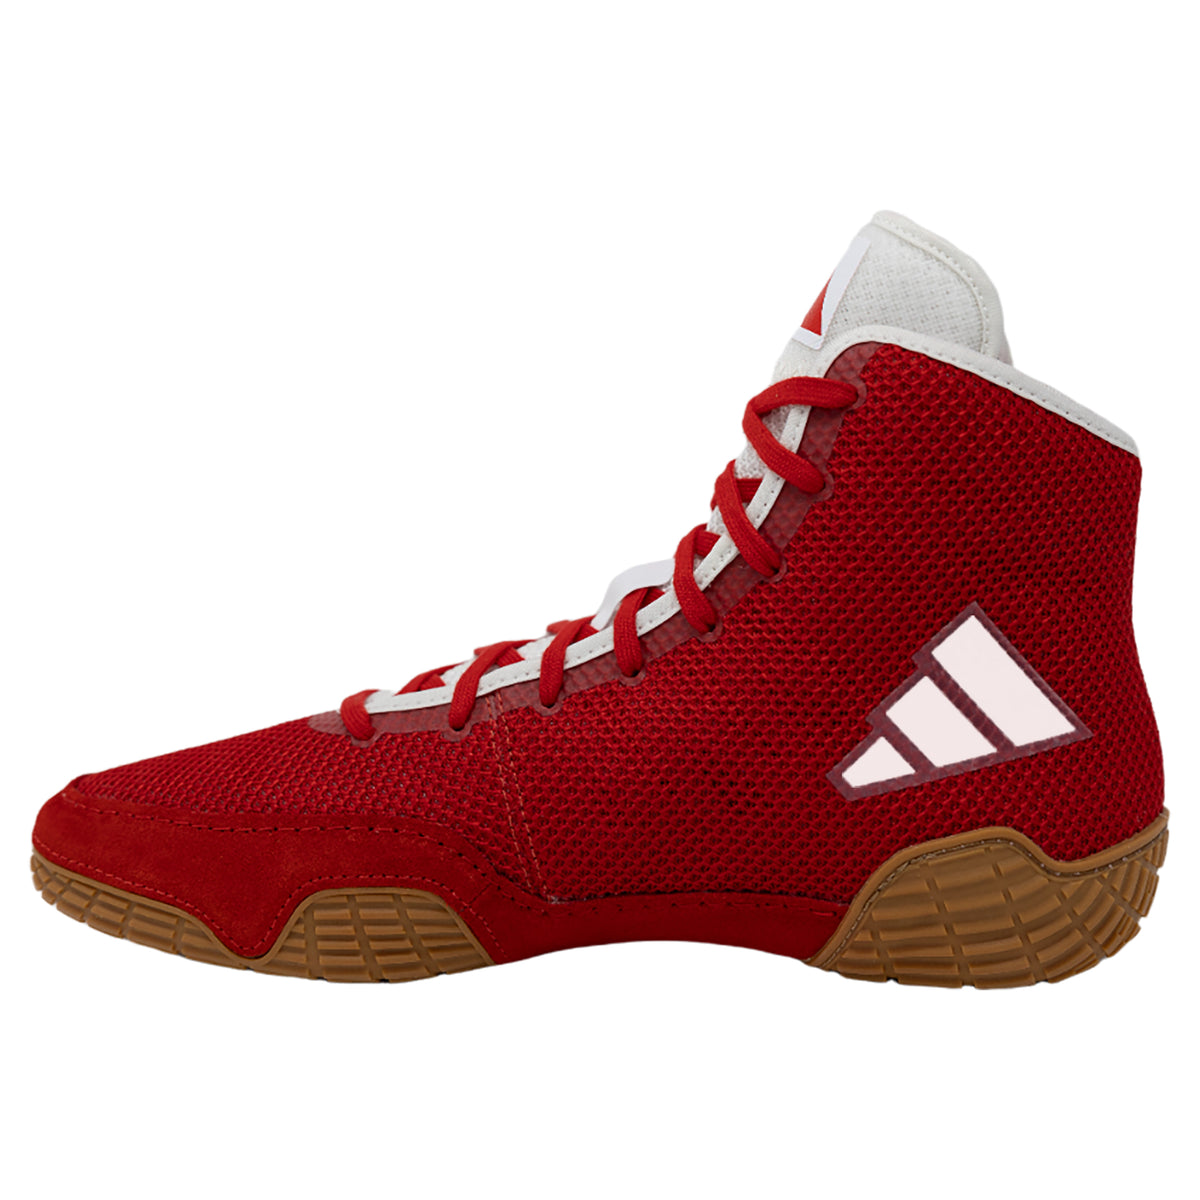 Adidas | IF9924 | Tech Fall 2.0 | Red/White Wrestling Shoes